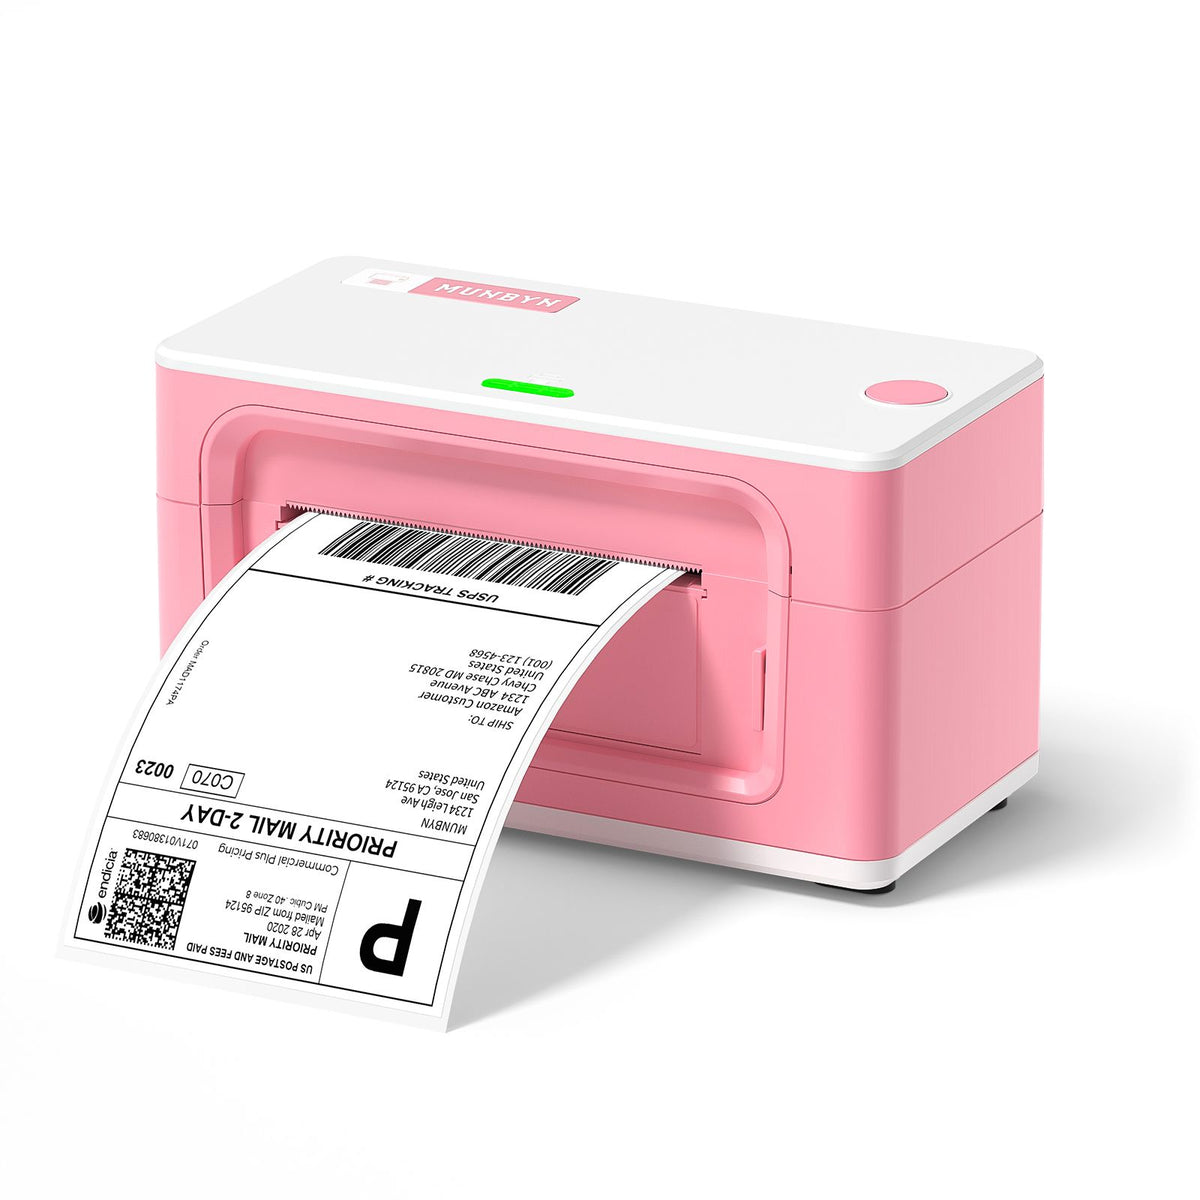 MUNBYN 941 USB thermal label printer is cute and stylish.